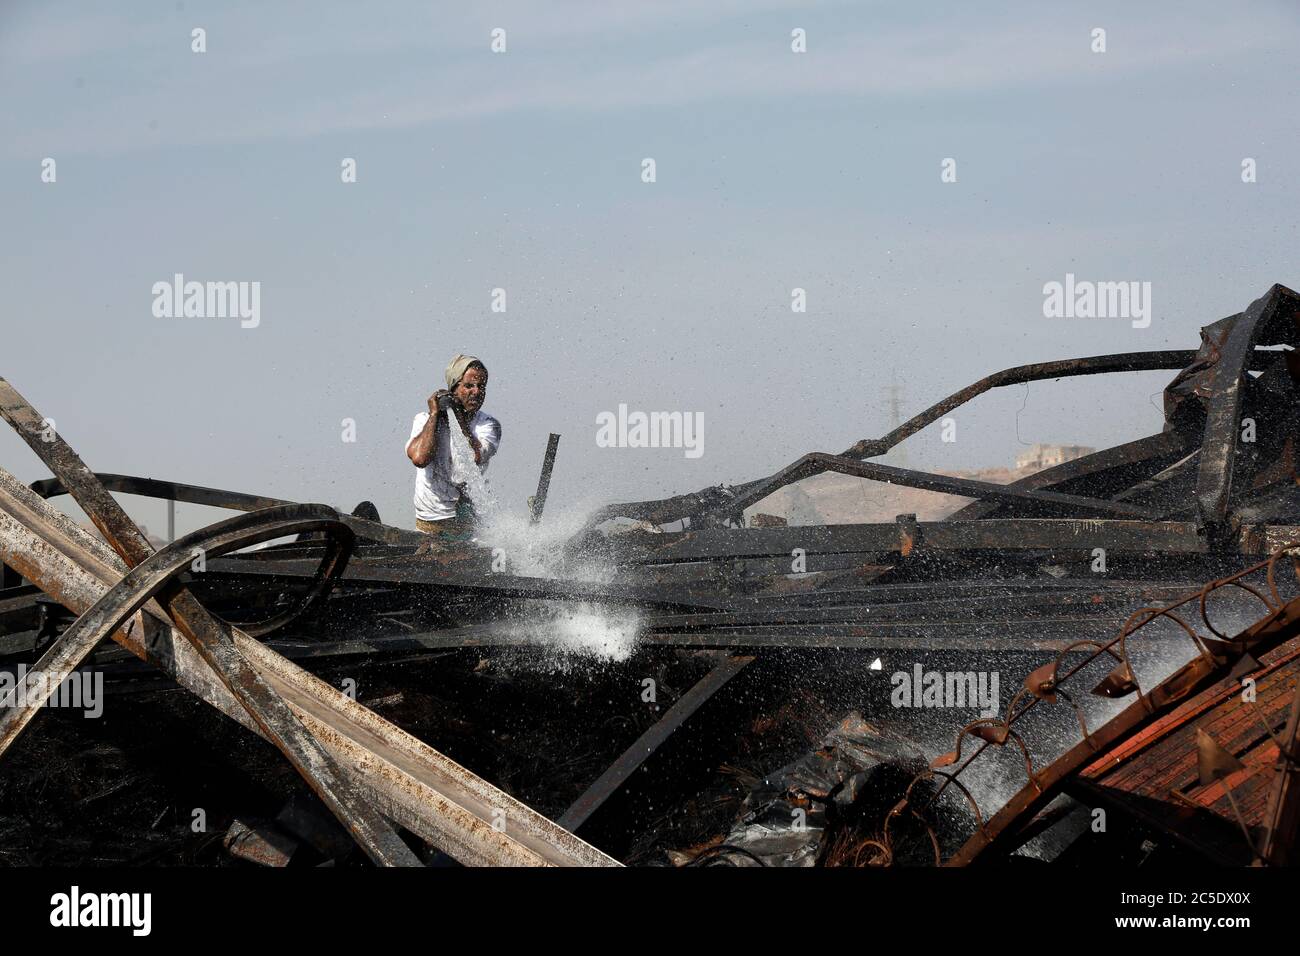 Sanaa, Yemen. 2nd July, 2020. A man tries to extinguish a fire following airstrikes on a warehouse in Sanaa, Yemen, on July 2, 2020. The Saudi-led coalition on Wednesday launched a series of airstrikes on the Yemeni capital Sanaa, which is under Houthi control, the Houthi-run al-Masirah TV reported. Credit: Mohammed Mohammed/Xinhua/Alamy Live News Stock Photo